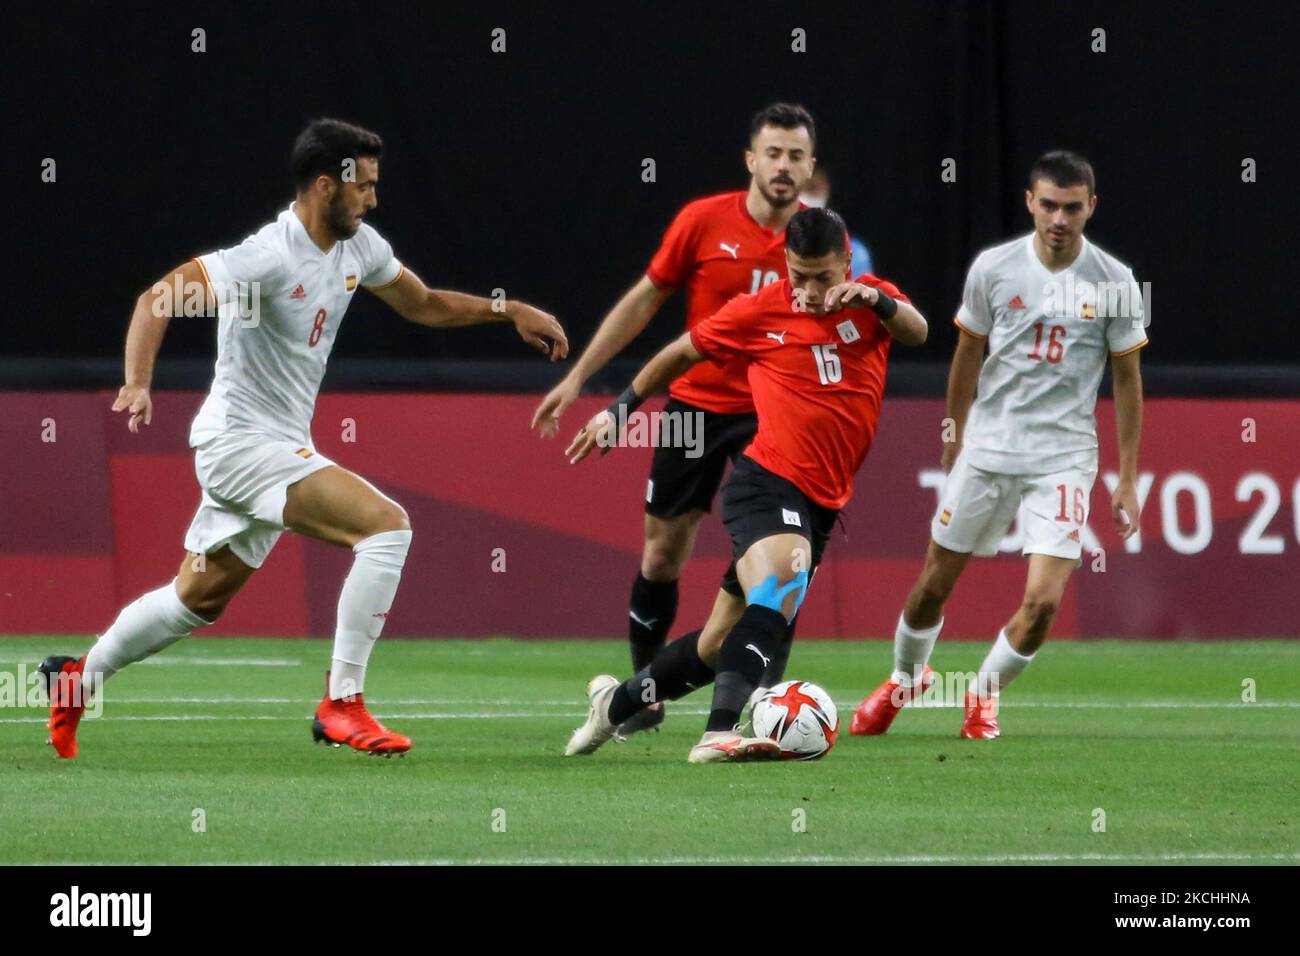 (15) Emam ASHOUR of Team Egypt battles for possession with (8) Mike MERINO of Team Spain during the Men's First Round Group C match between Egypt and Spain during the Tokyo 2020 Olympic Games at Sapporo Dome Stadium 22 July 2021 (Photo by Ayman Aref/NurPhoto) Stock Photo